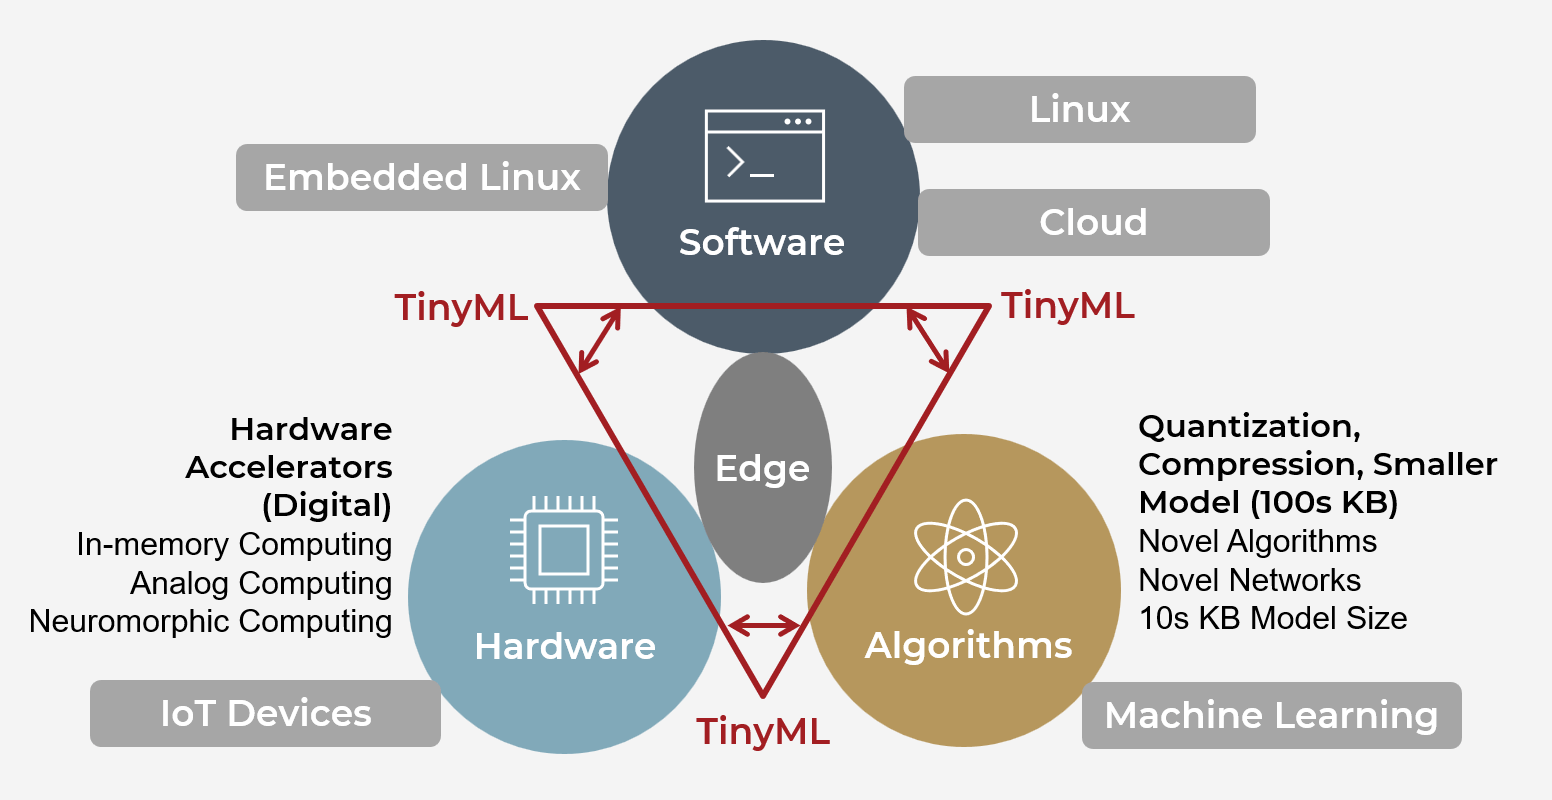 Structure of TinyML includes software, hardware and algorithms